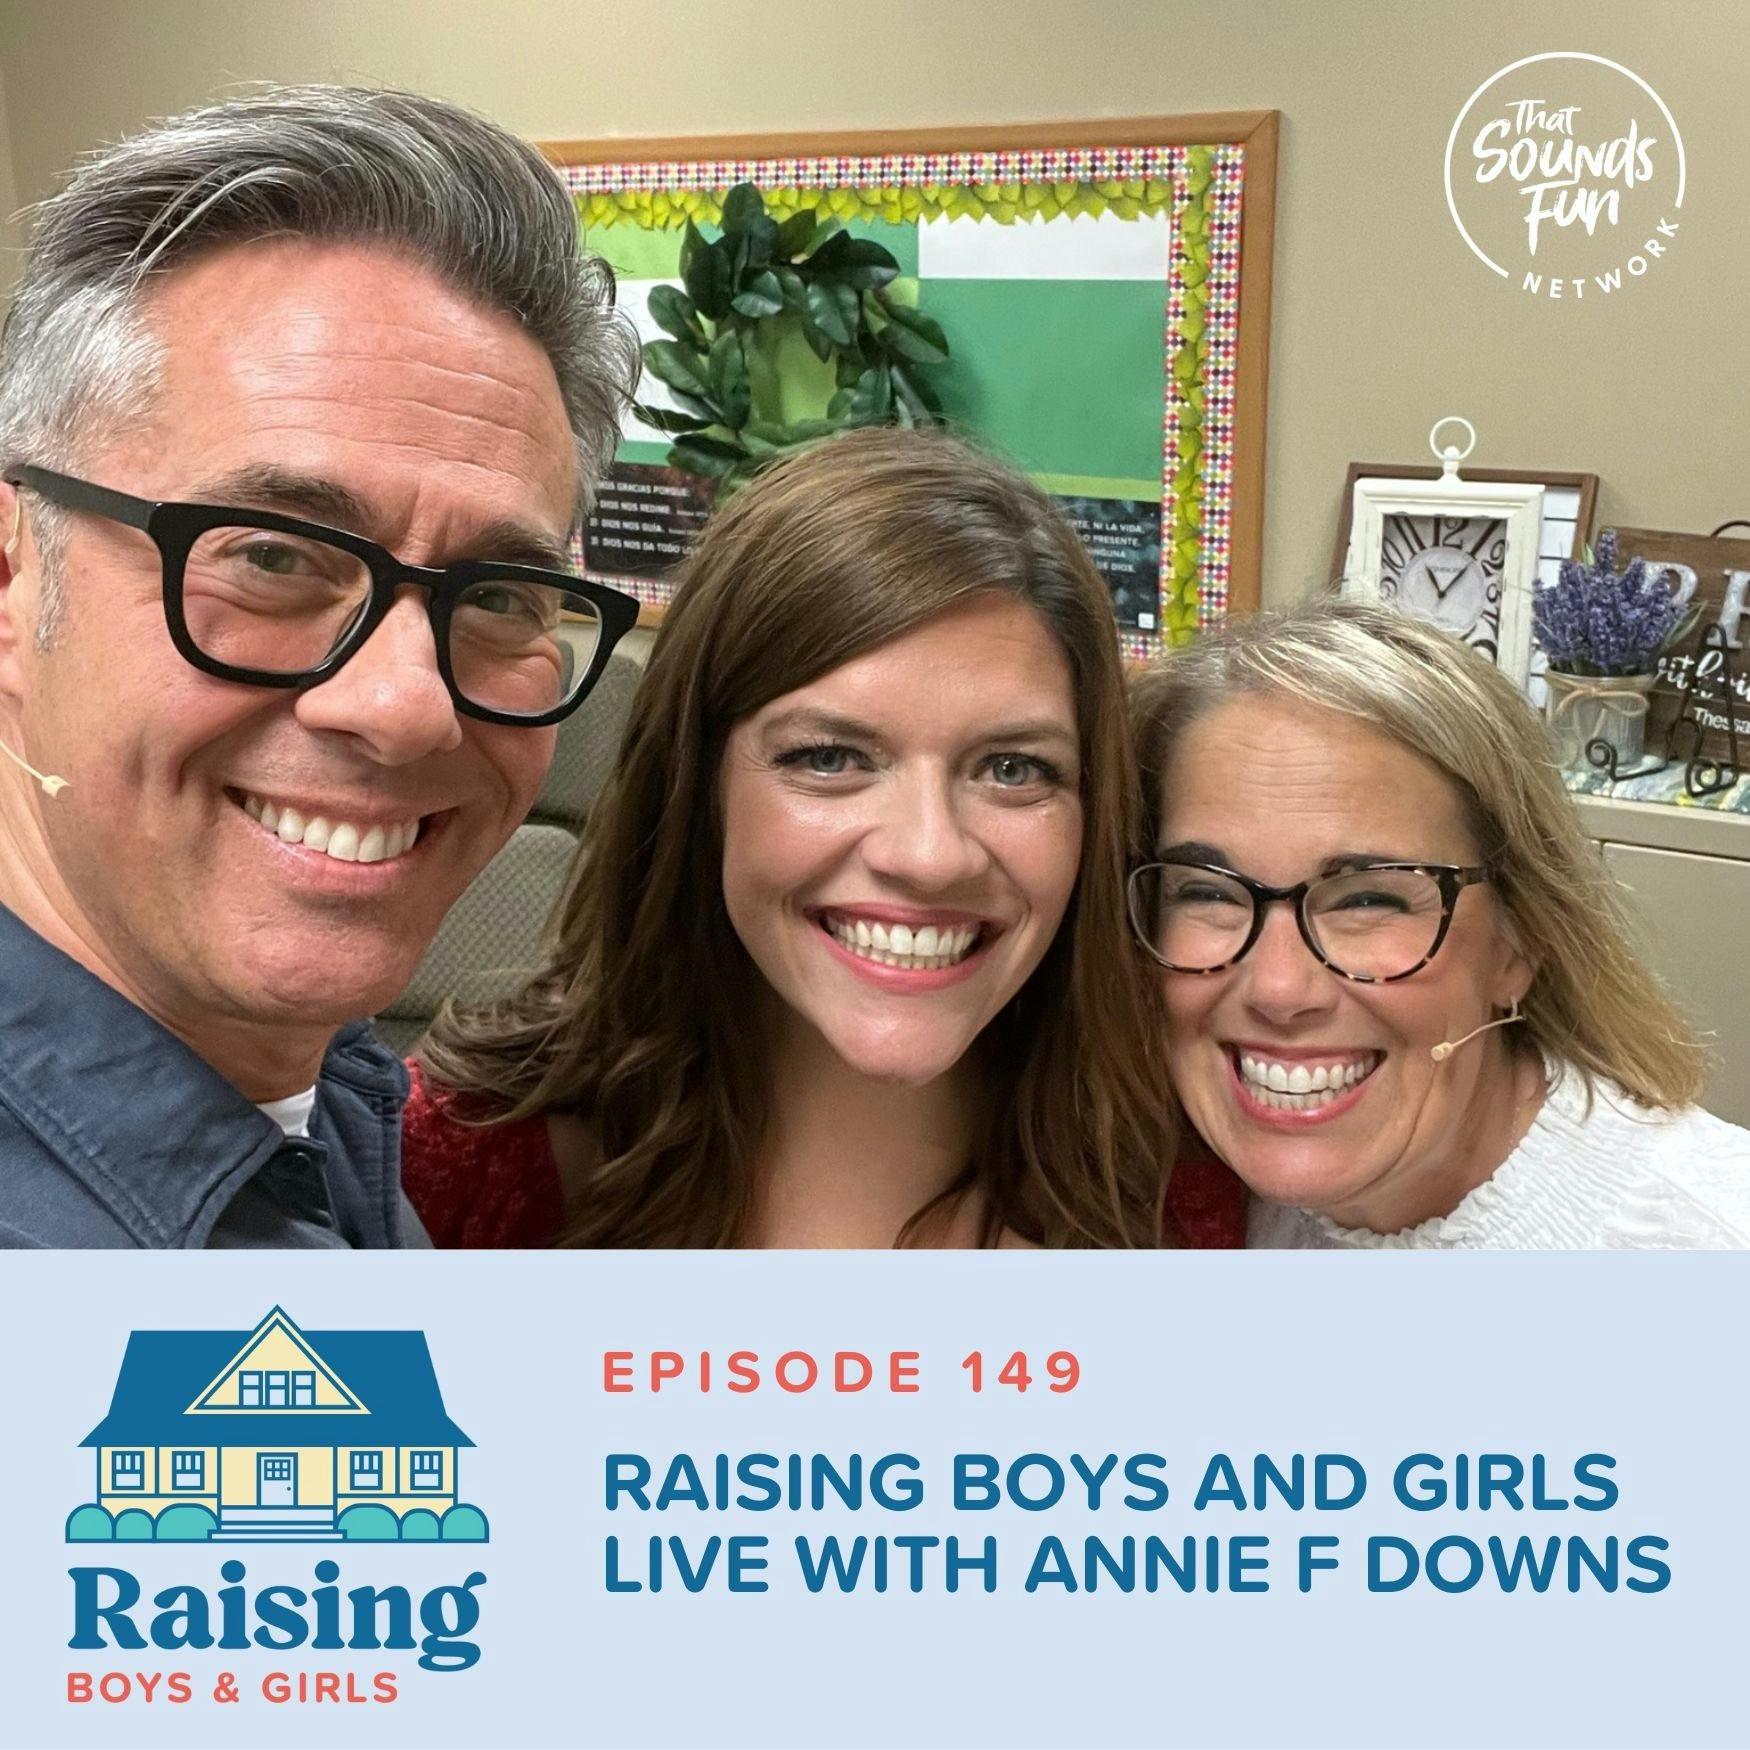 Episode 149: Raising Boys and Girls Live with Annie F Downs